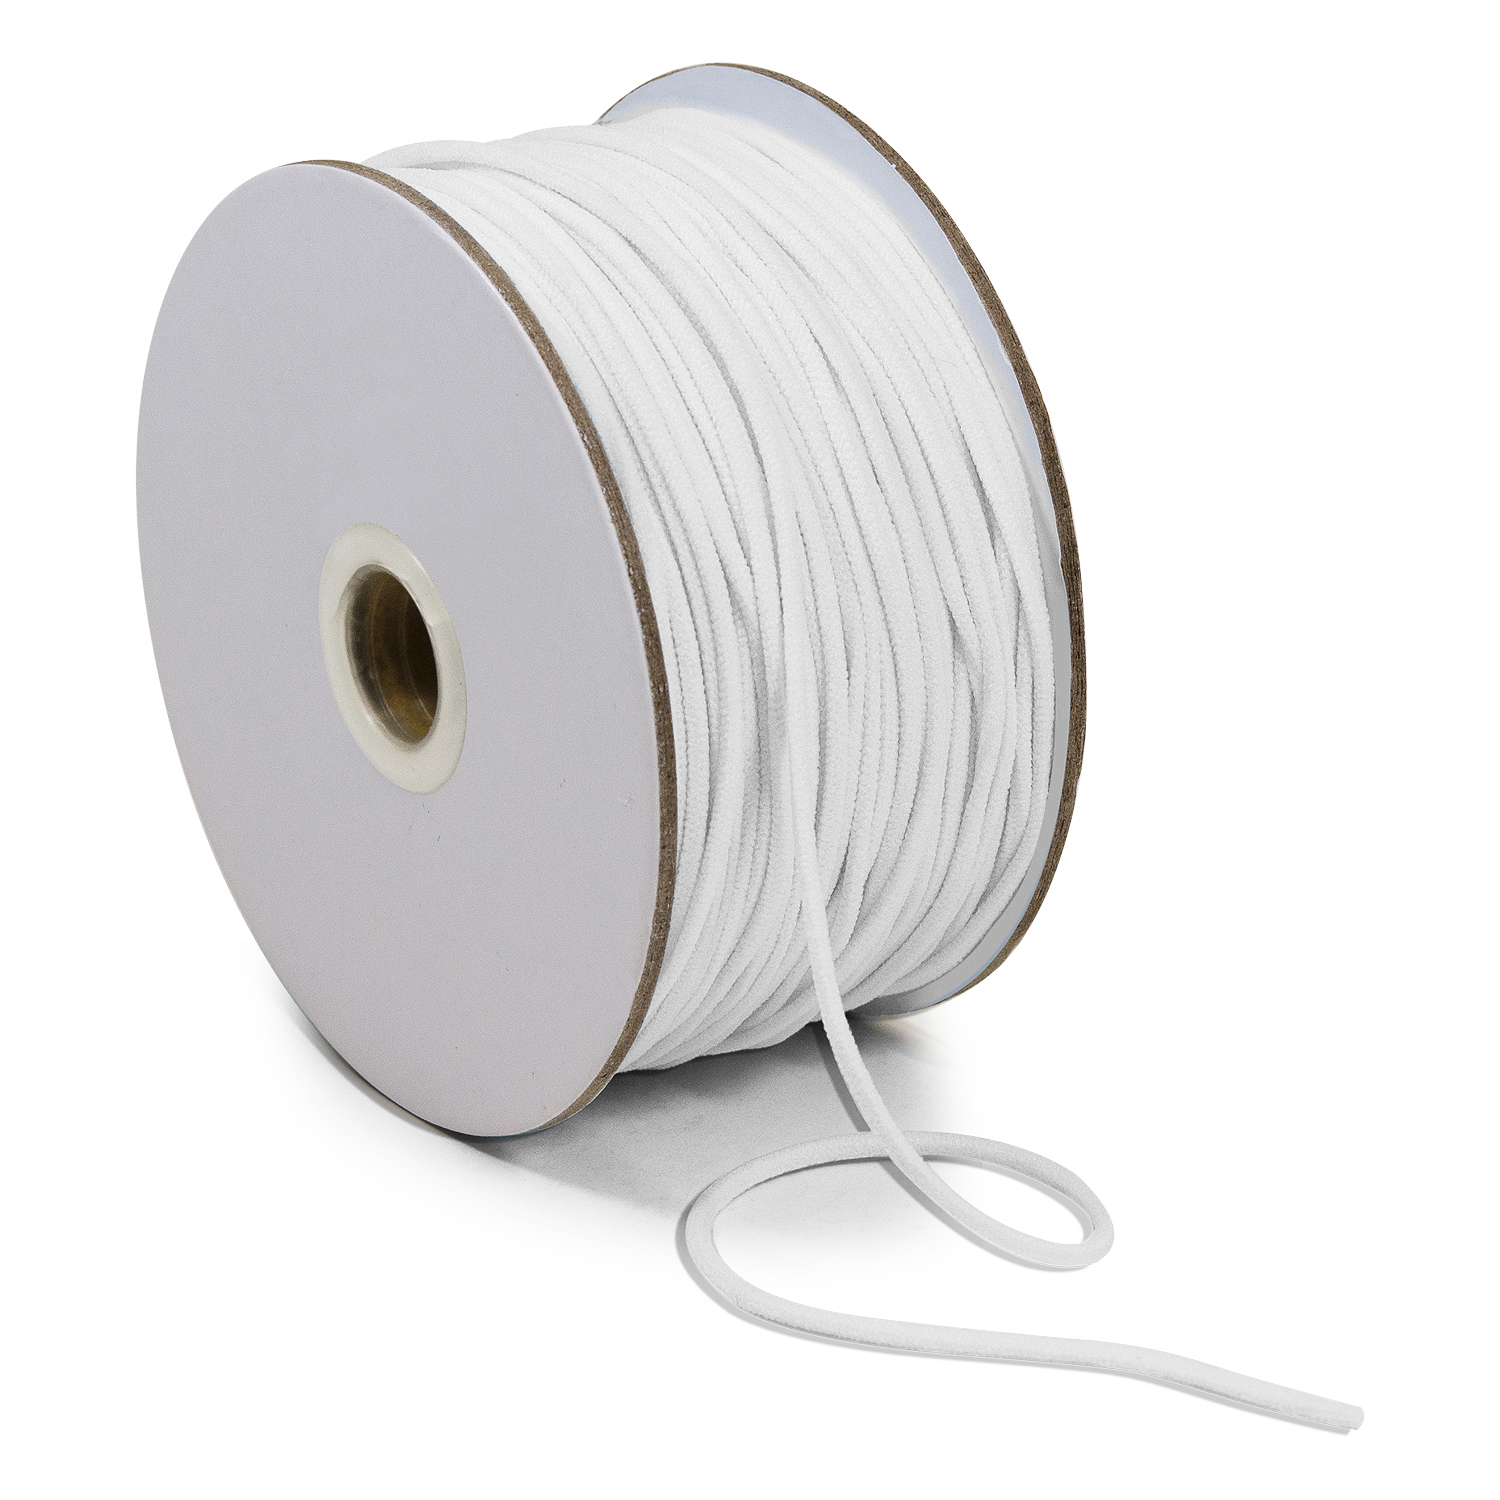 Knit Elastic: The All-Purpose Elastic for Simple Sewing